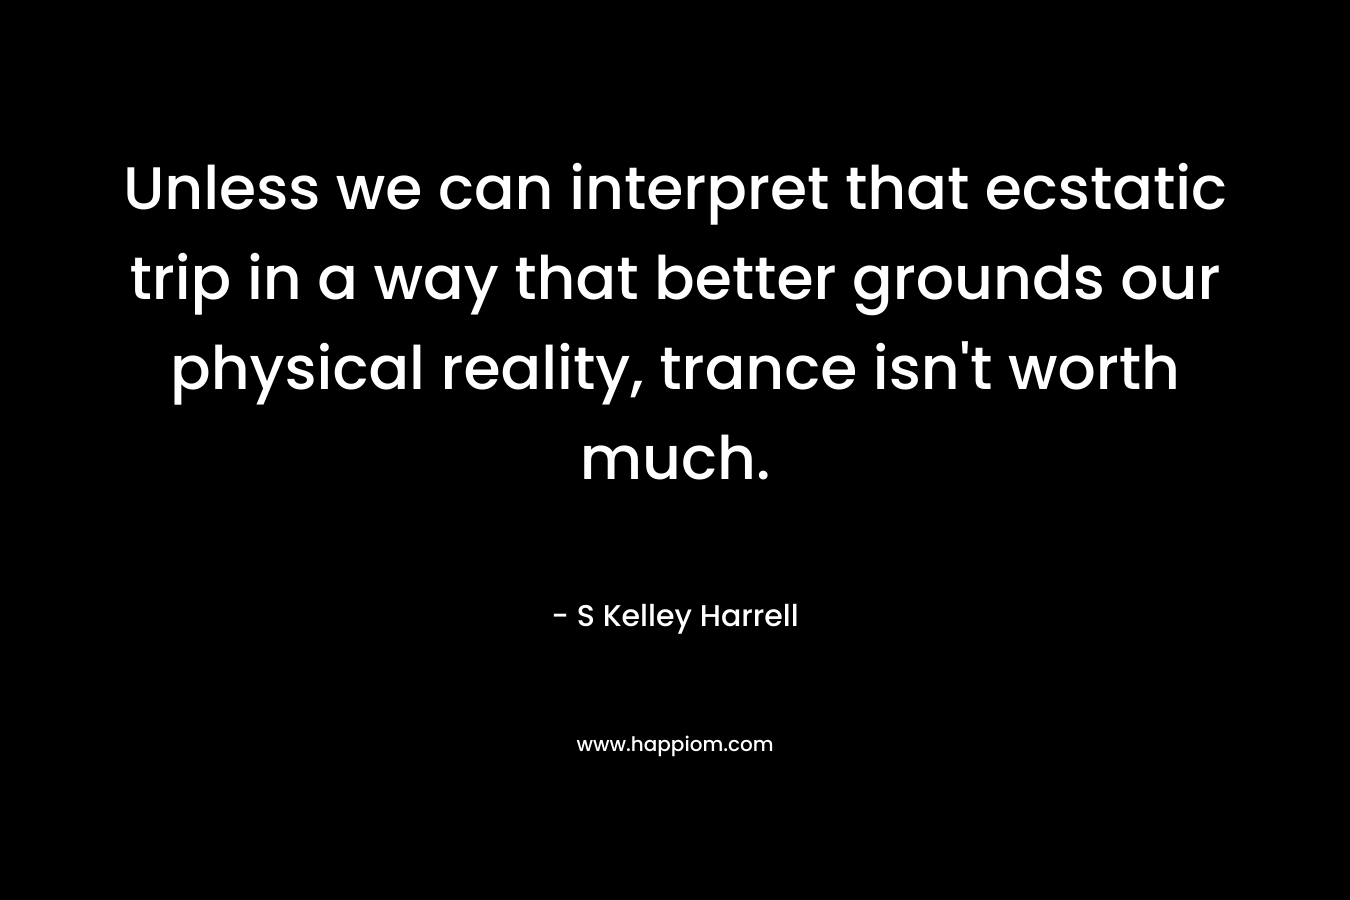 Unless we can interpret that ecstatic trip in a way that better grounds our physical reality, trance isn’t worth much. – S Kelley Harrell